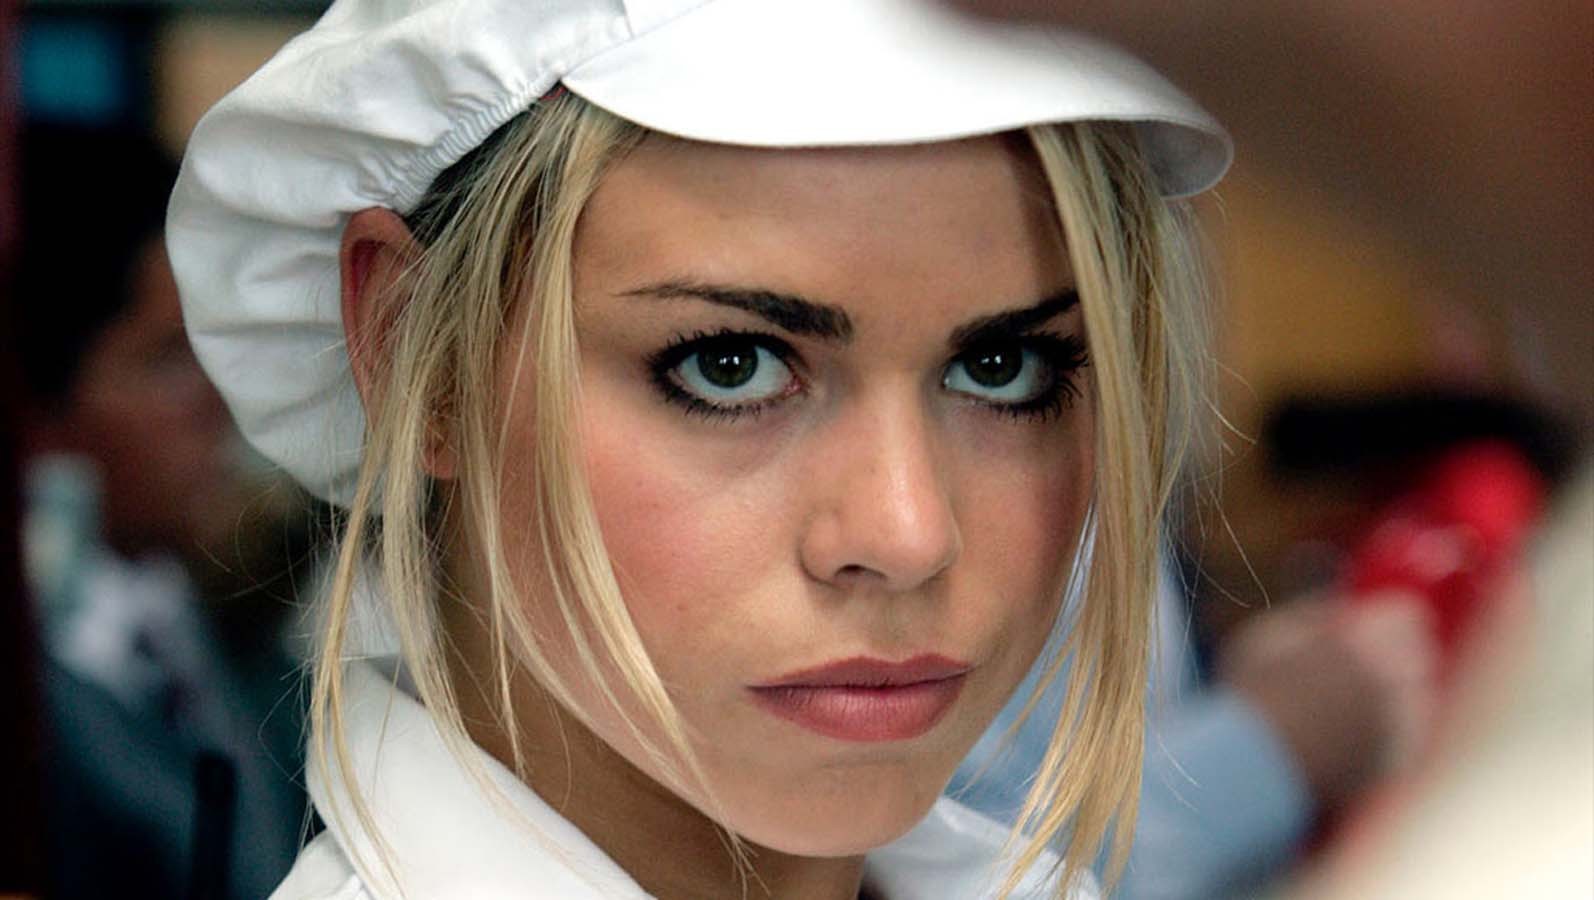 People 1594x900 Billie Piper actress blonde women women with hats film stills TV series Doctor Who face